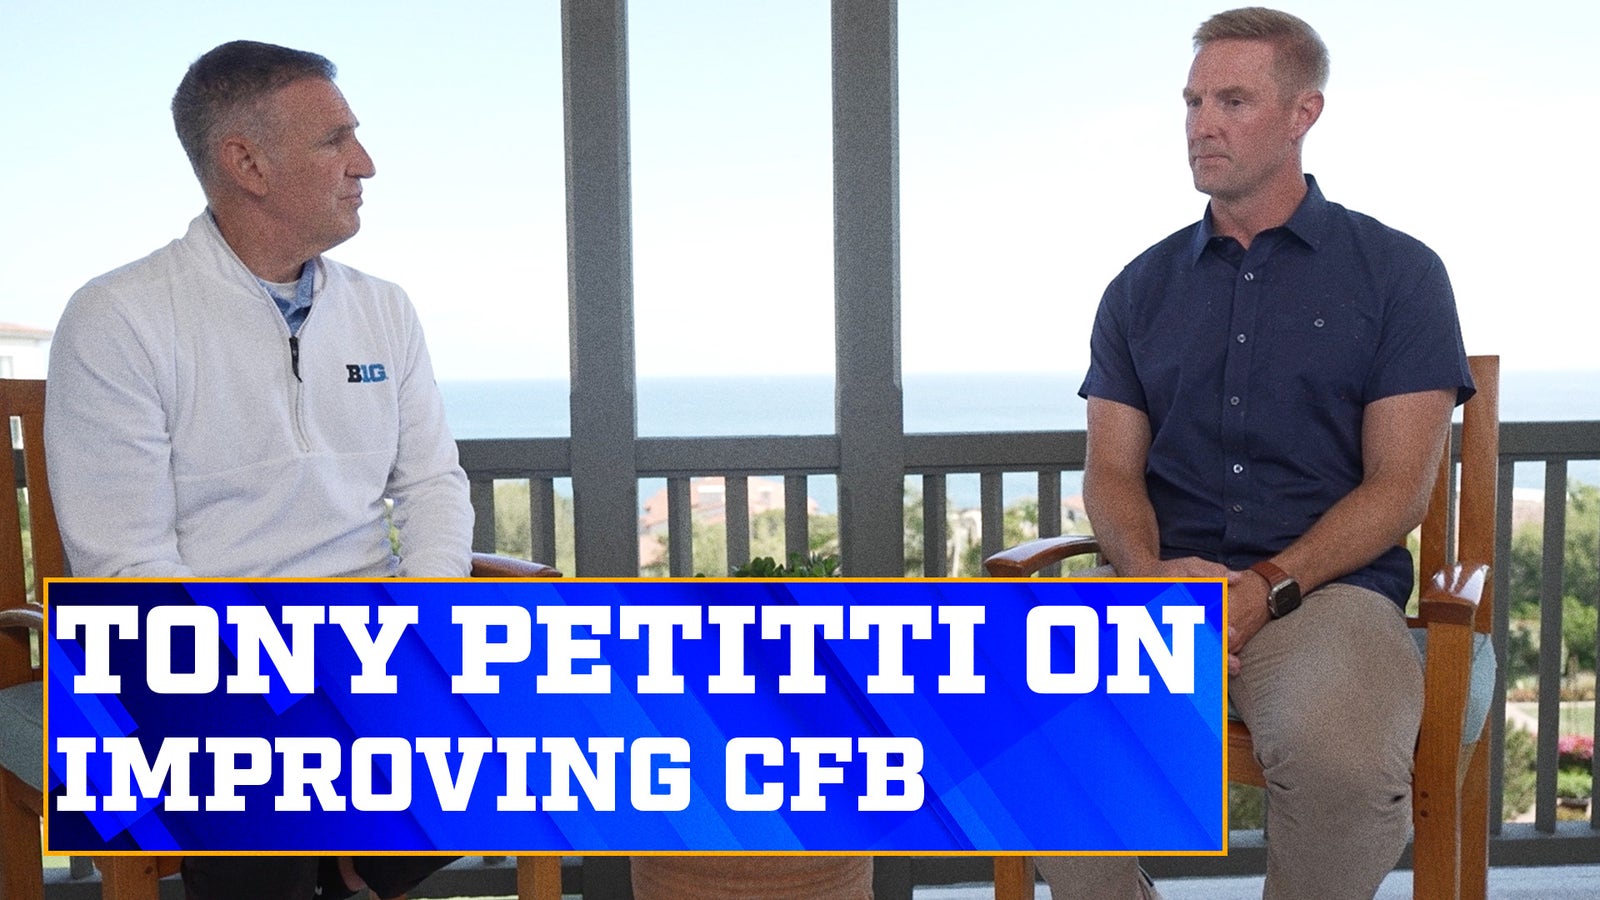 Tony Petitti talks about working with other conferences to improve college football